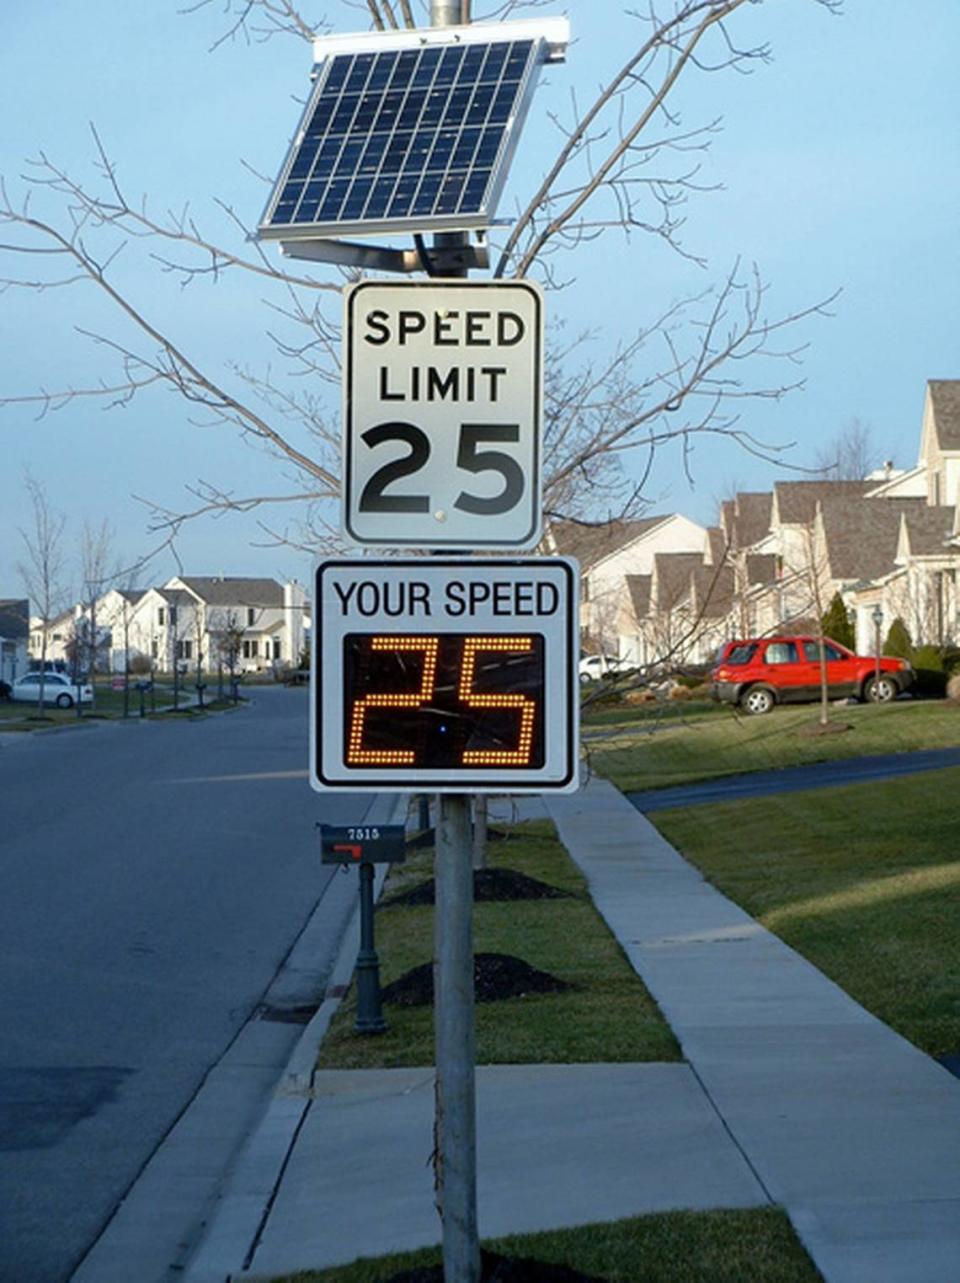 You’ll be seeing more of these speed-feedback around the county in the coming weeks. The Ada County Highway District is installing 50 of them to remind you to slow down and drive the posted speed.